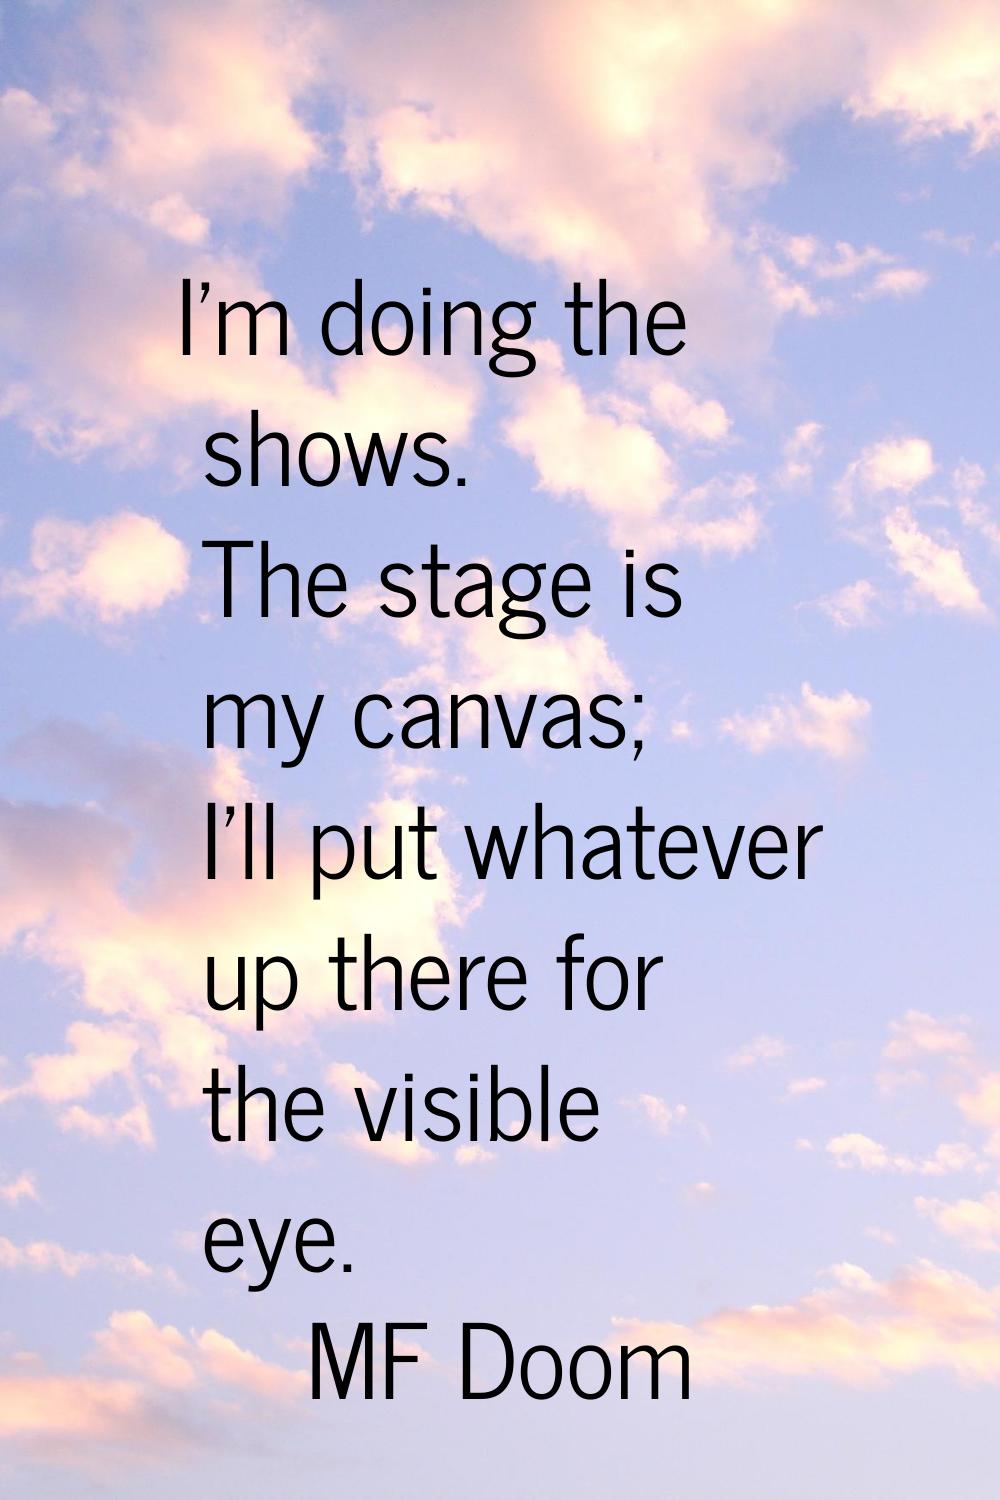 I'm doing the shows. The stage is my canvas; I'll put whatever up there for the visible eye.